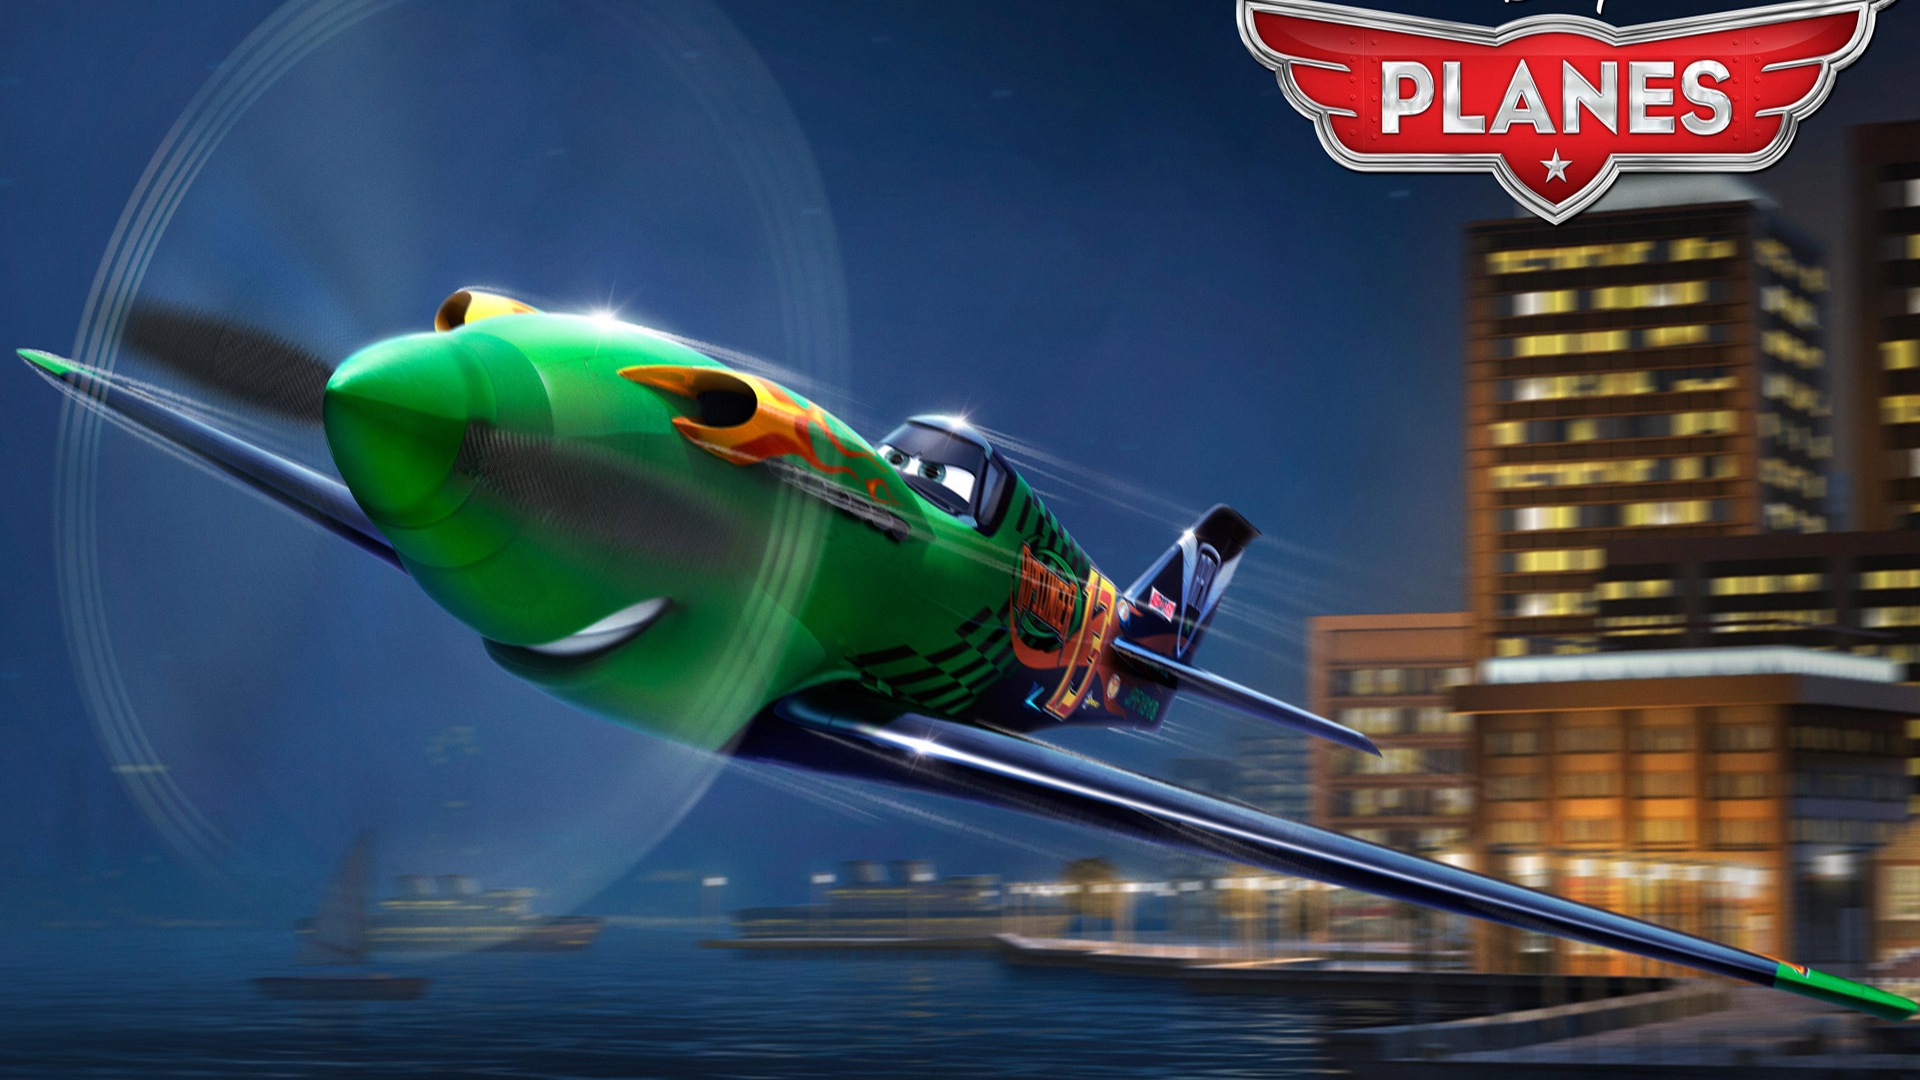 Planes 2013 HD wallpapers #14 - 1920x1080